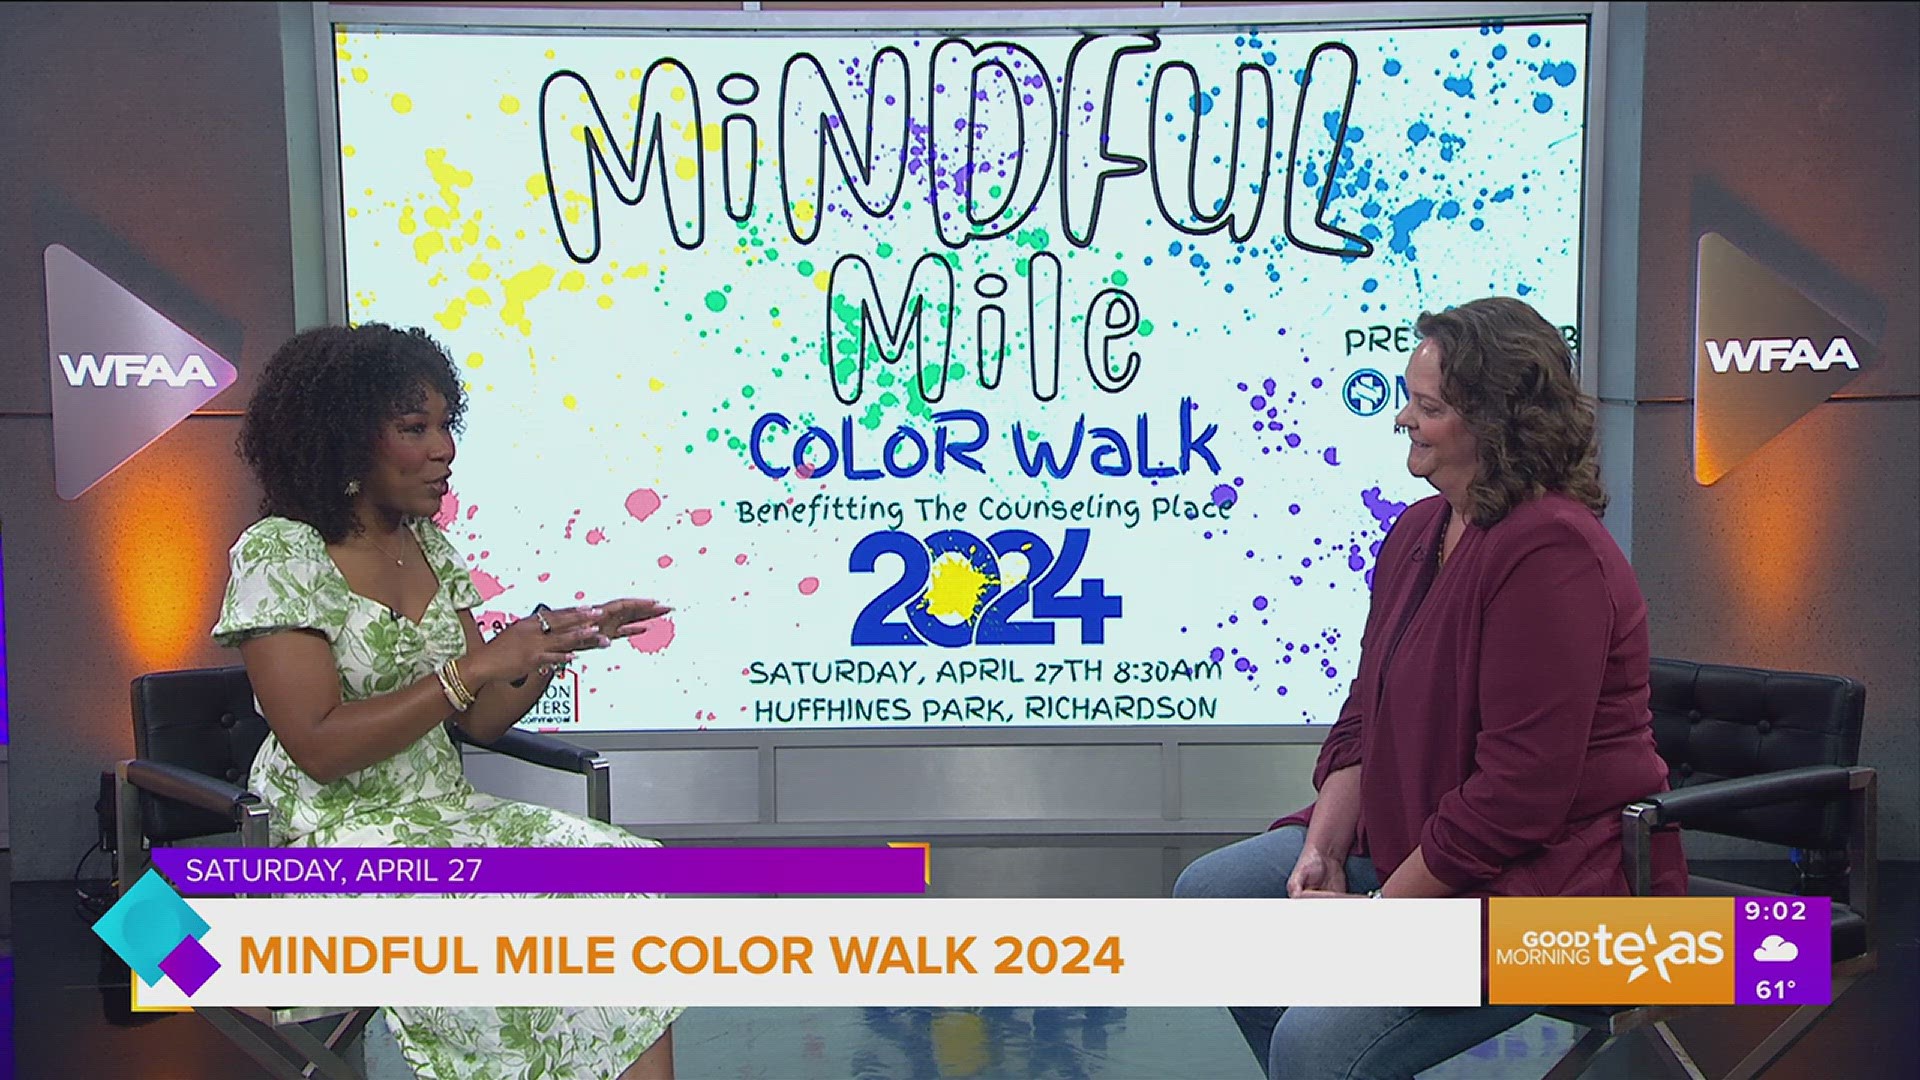 Deborah Dobbs with The Counseling Place shares more about this year's Mindful Mile Color Walk. Go to counselingplace.org/mindful-mile-color-walk for more information